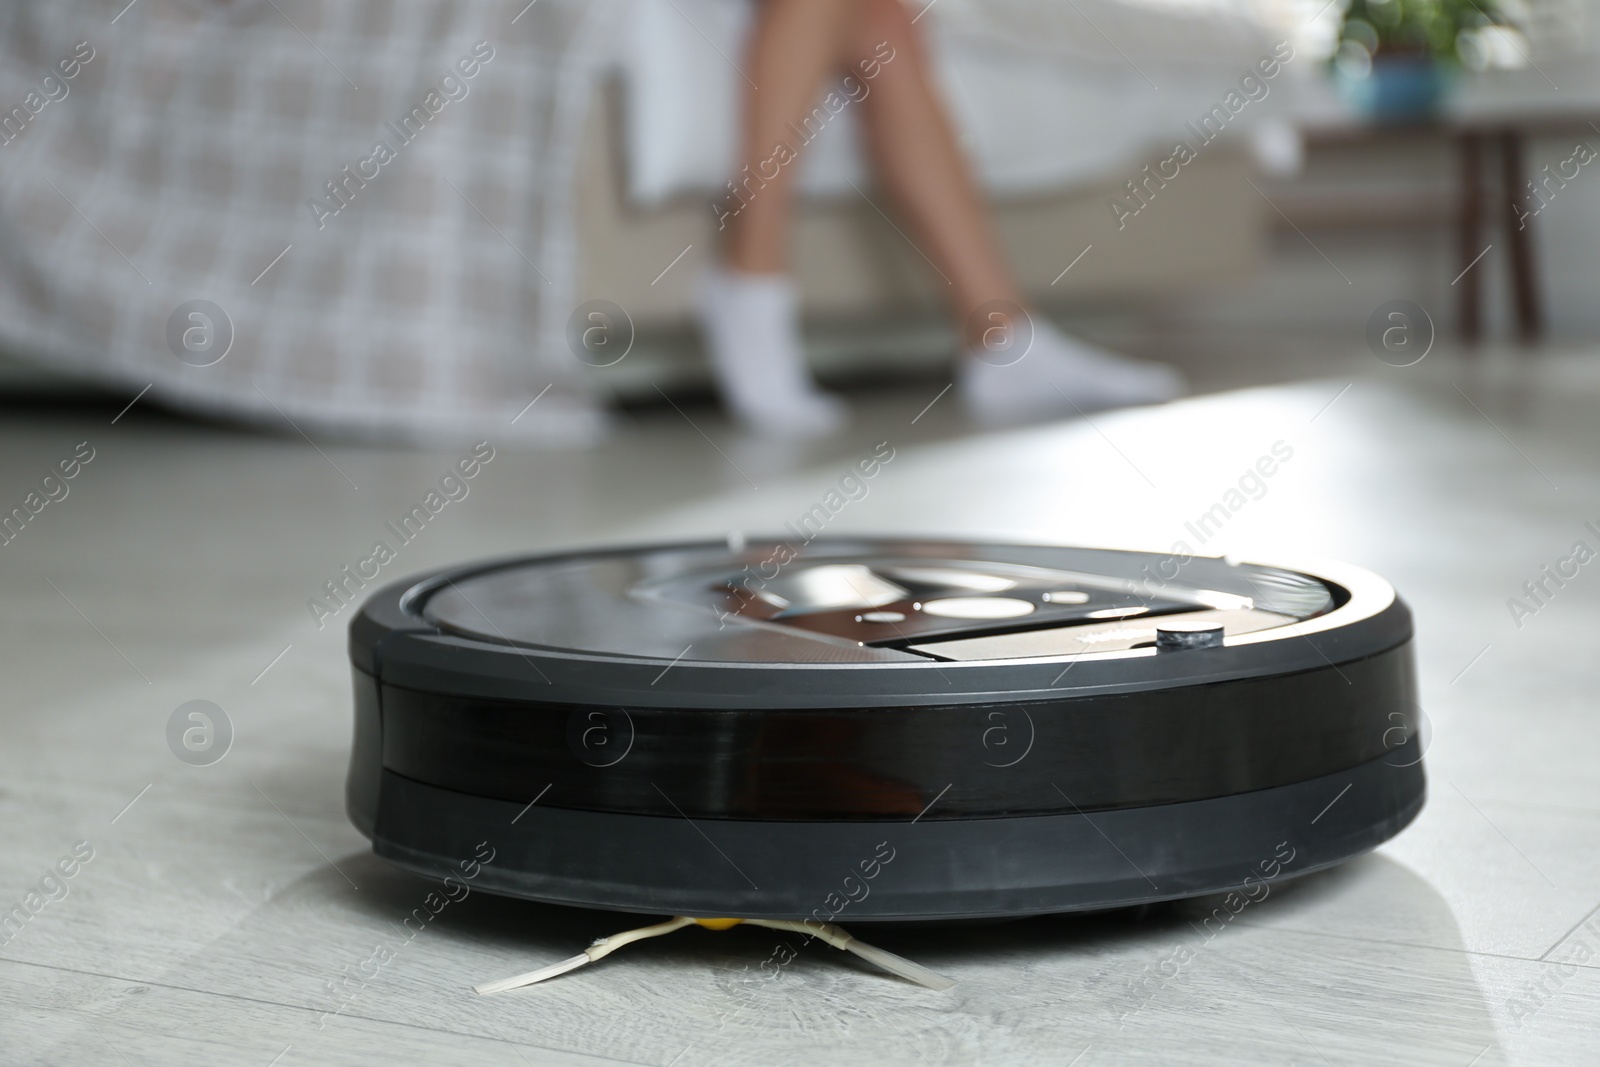 Photo of Modern robotic vacuum cleaner and blurred woman on background